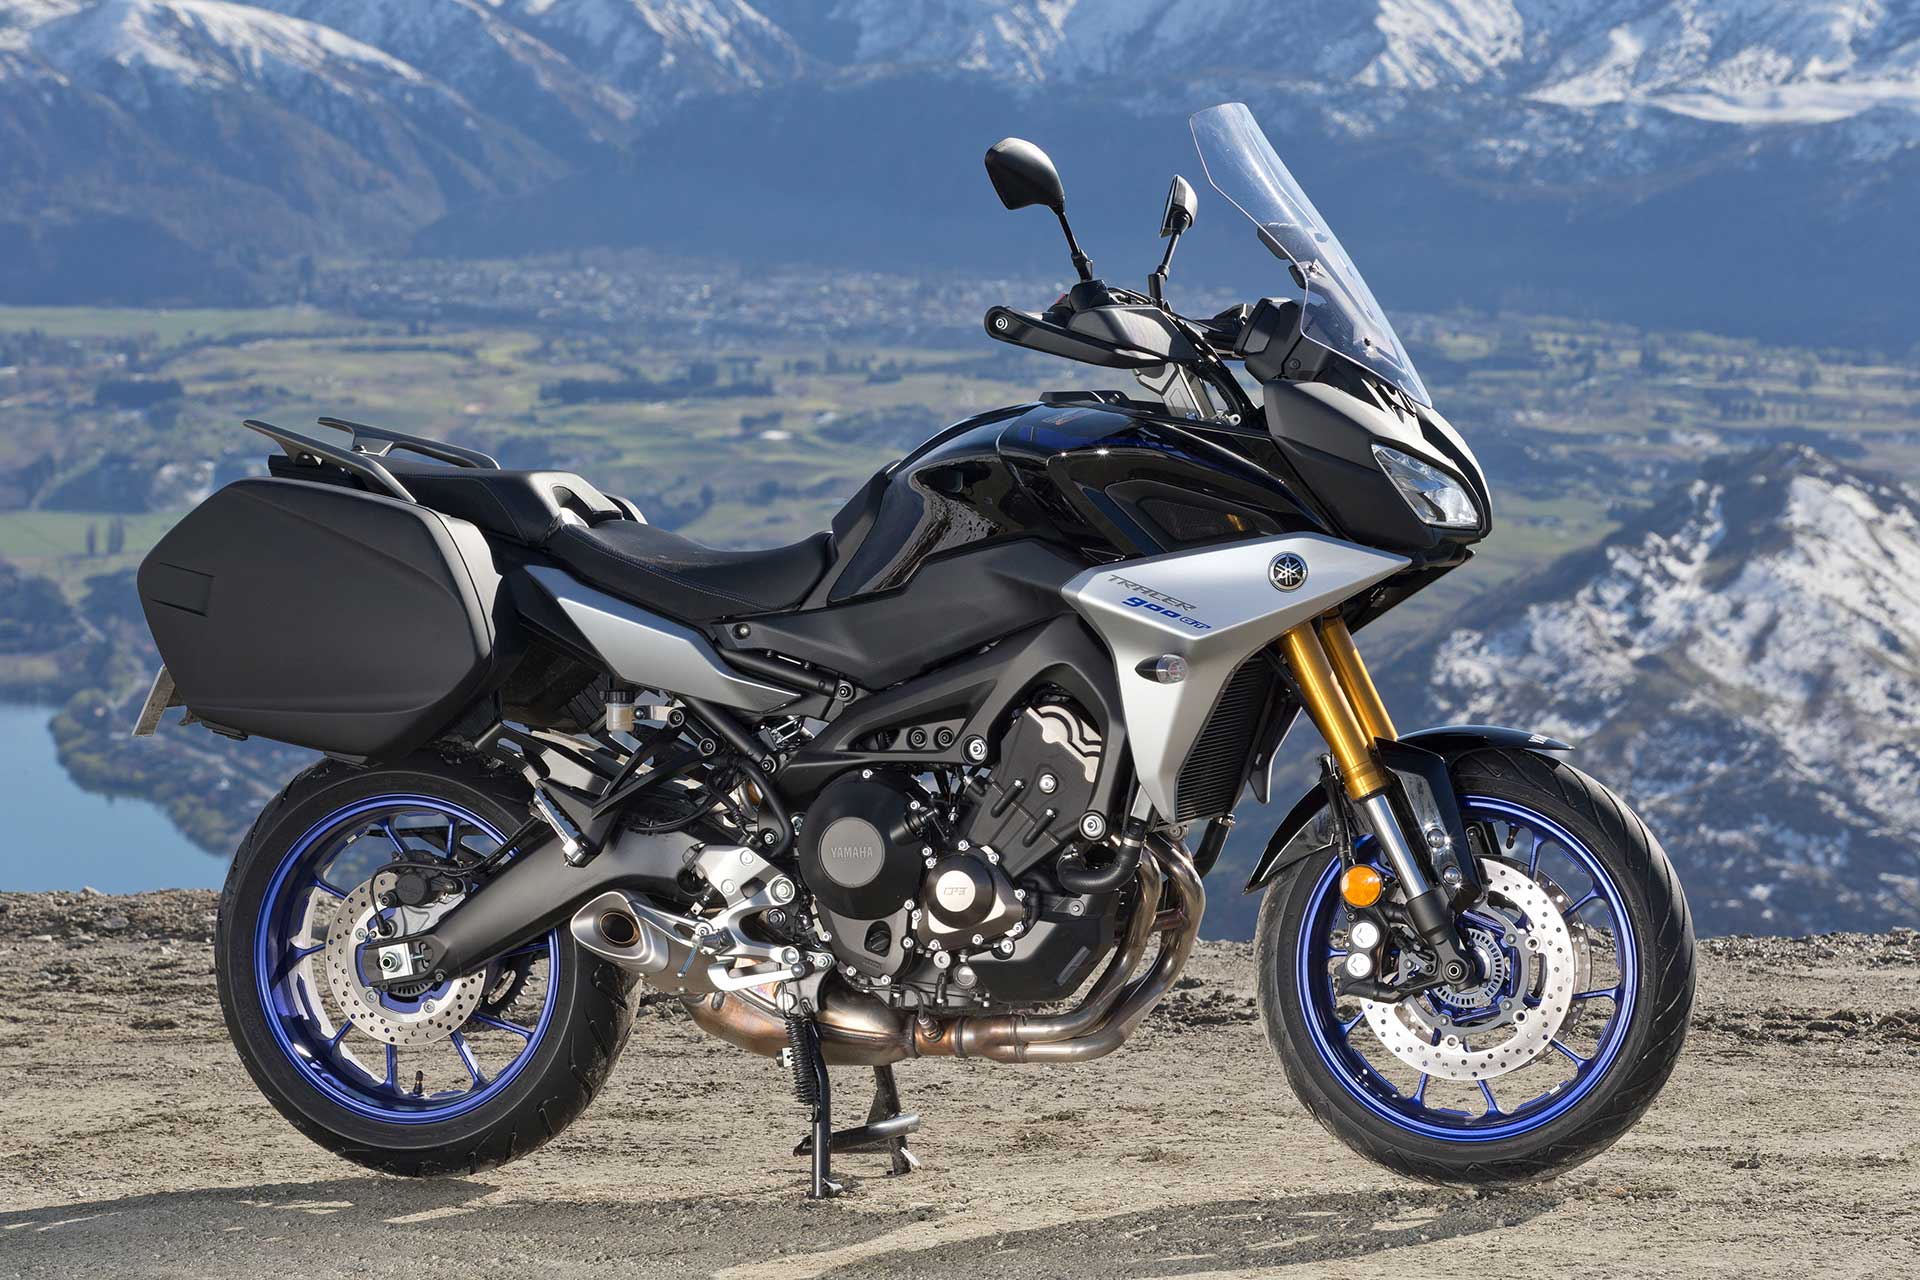 2019 Yamaha Tracer 900 First Look | 14 Fast Facts